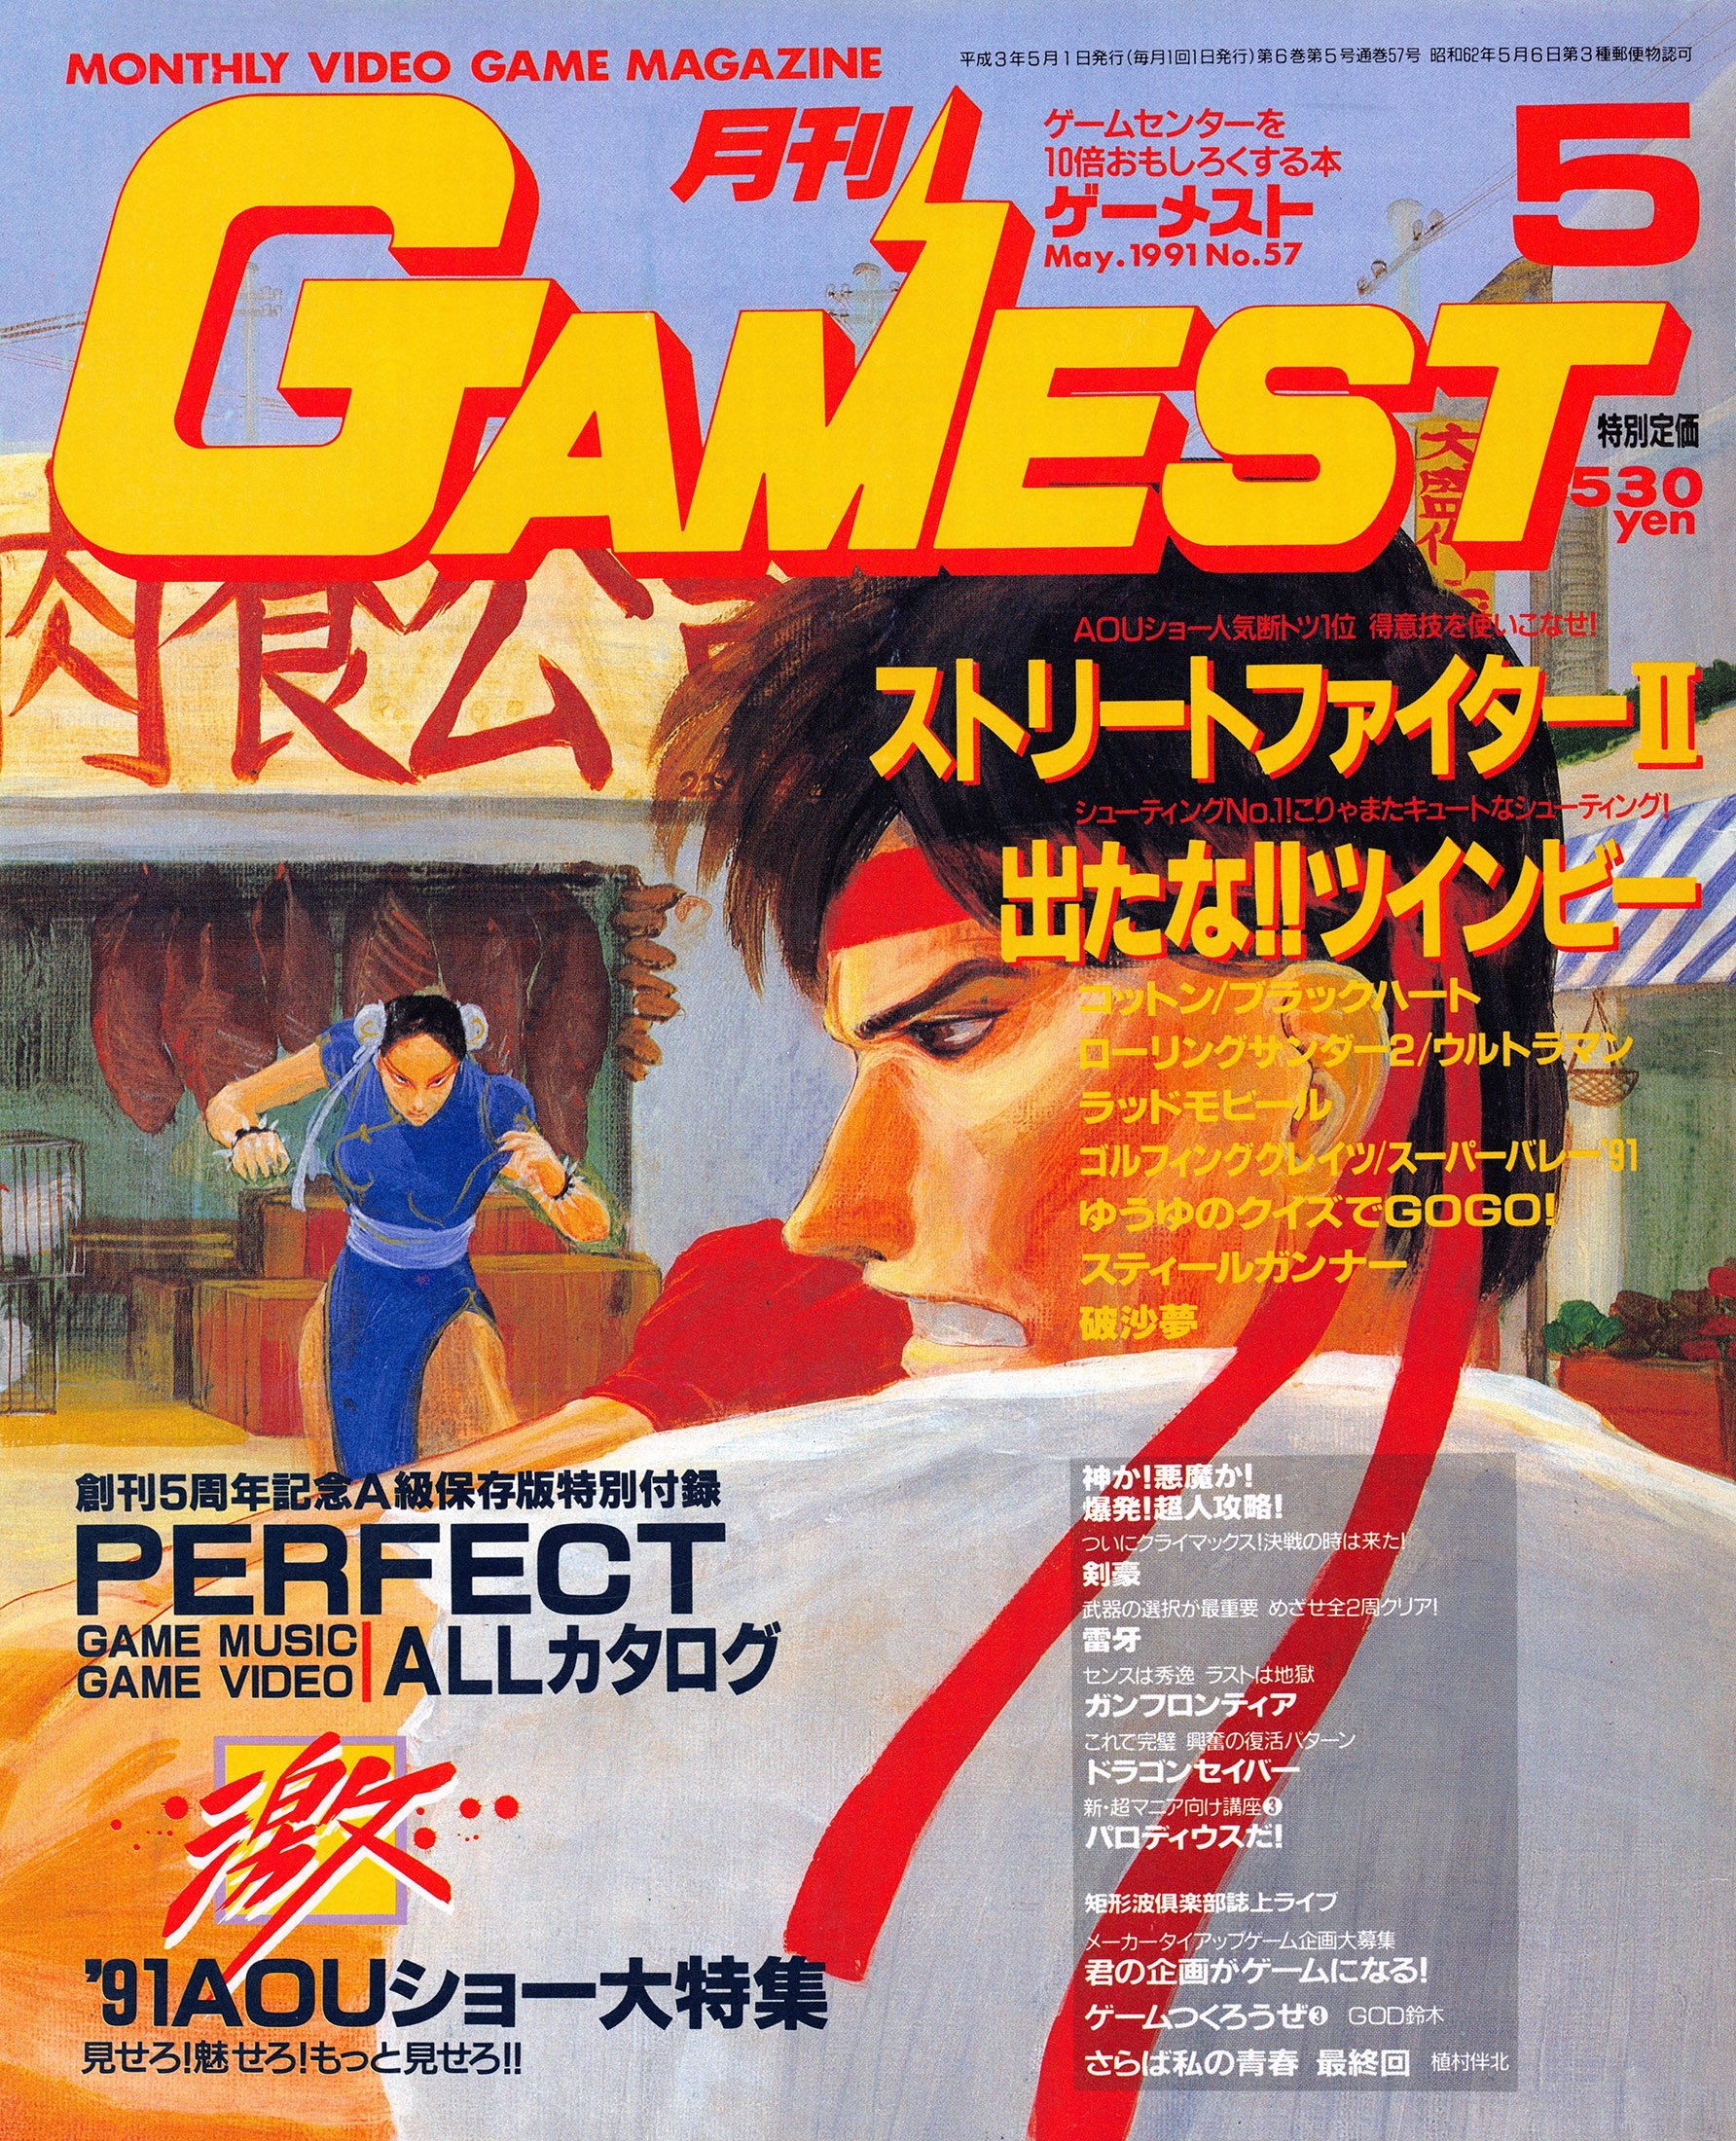 Gamest - Video Game Magazines - Page 3 - Retromags Community